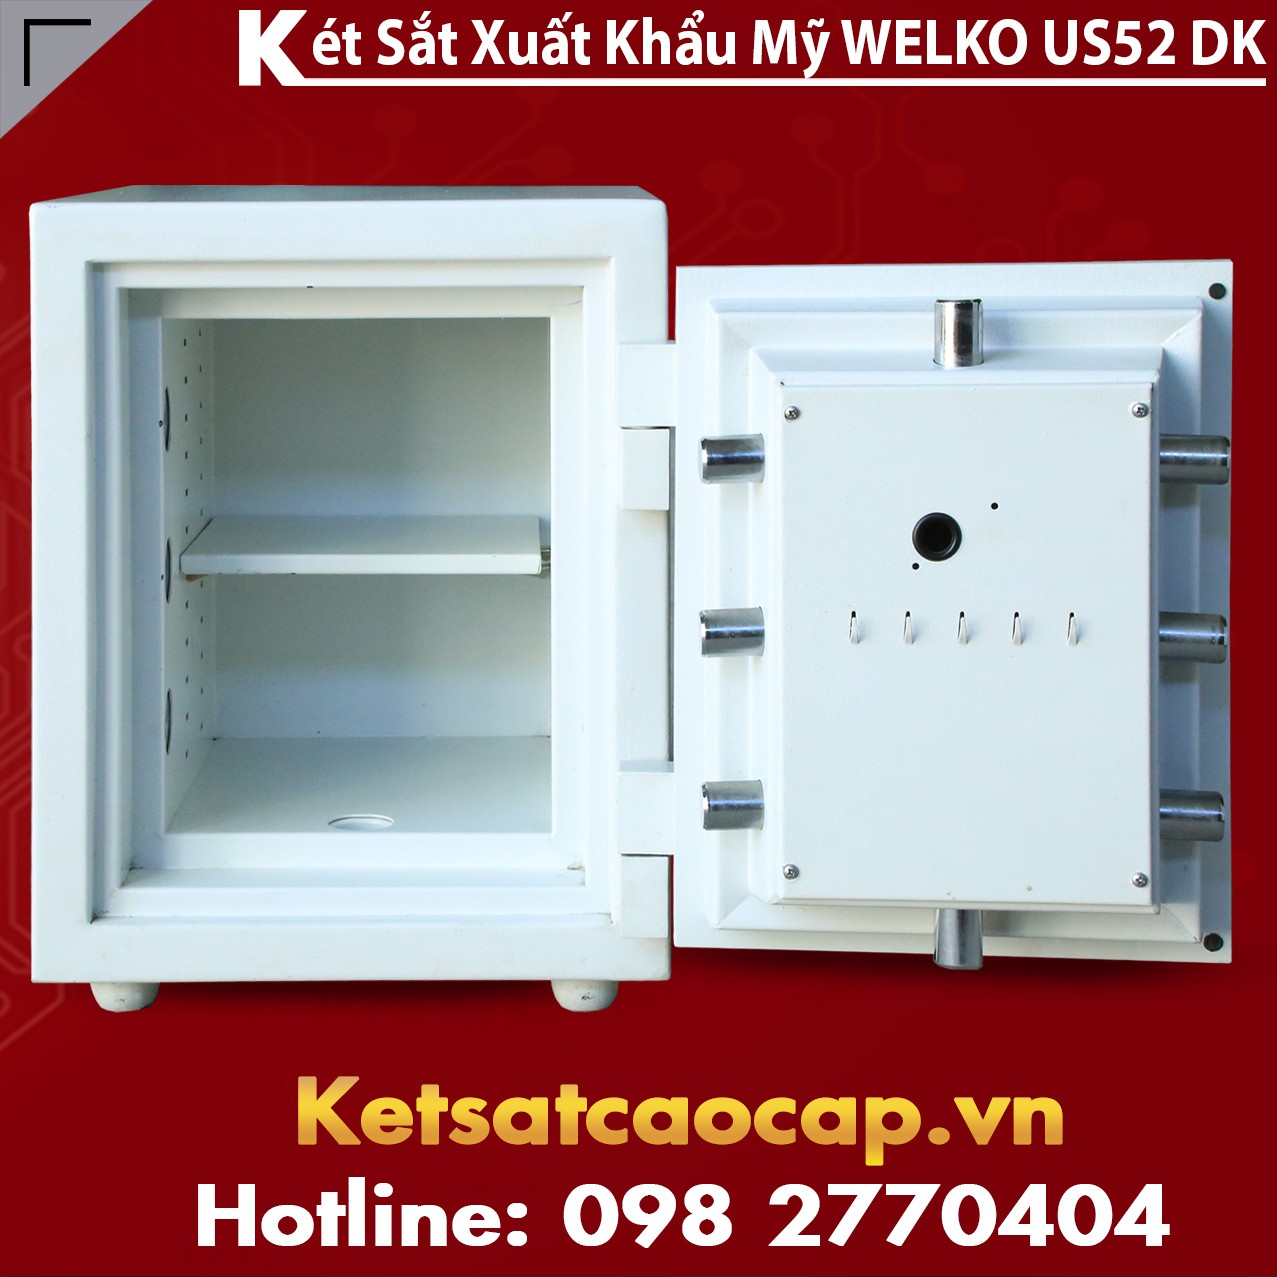 Used Hotel Safes High Quality Price Ratio‎ - Dai Ly Ban Ket Sat Mini Safes Cao Cap Nhat VN